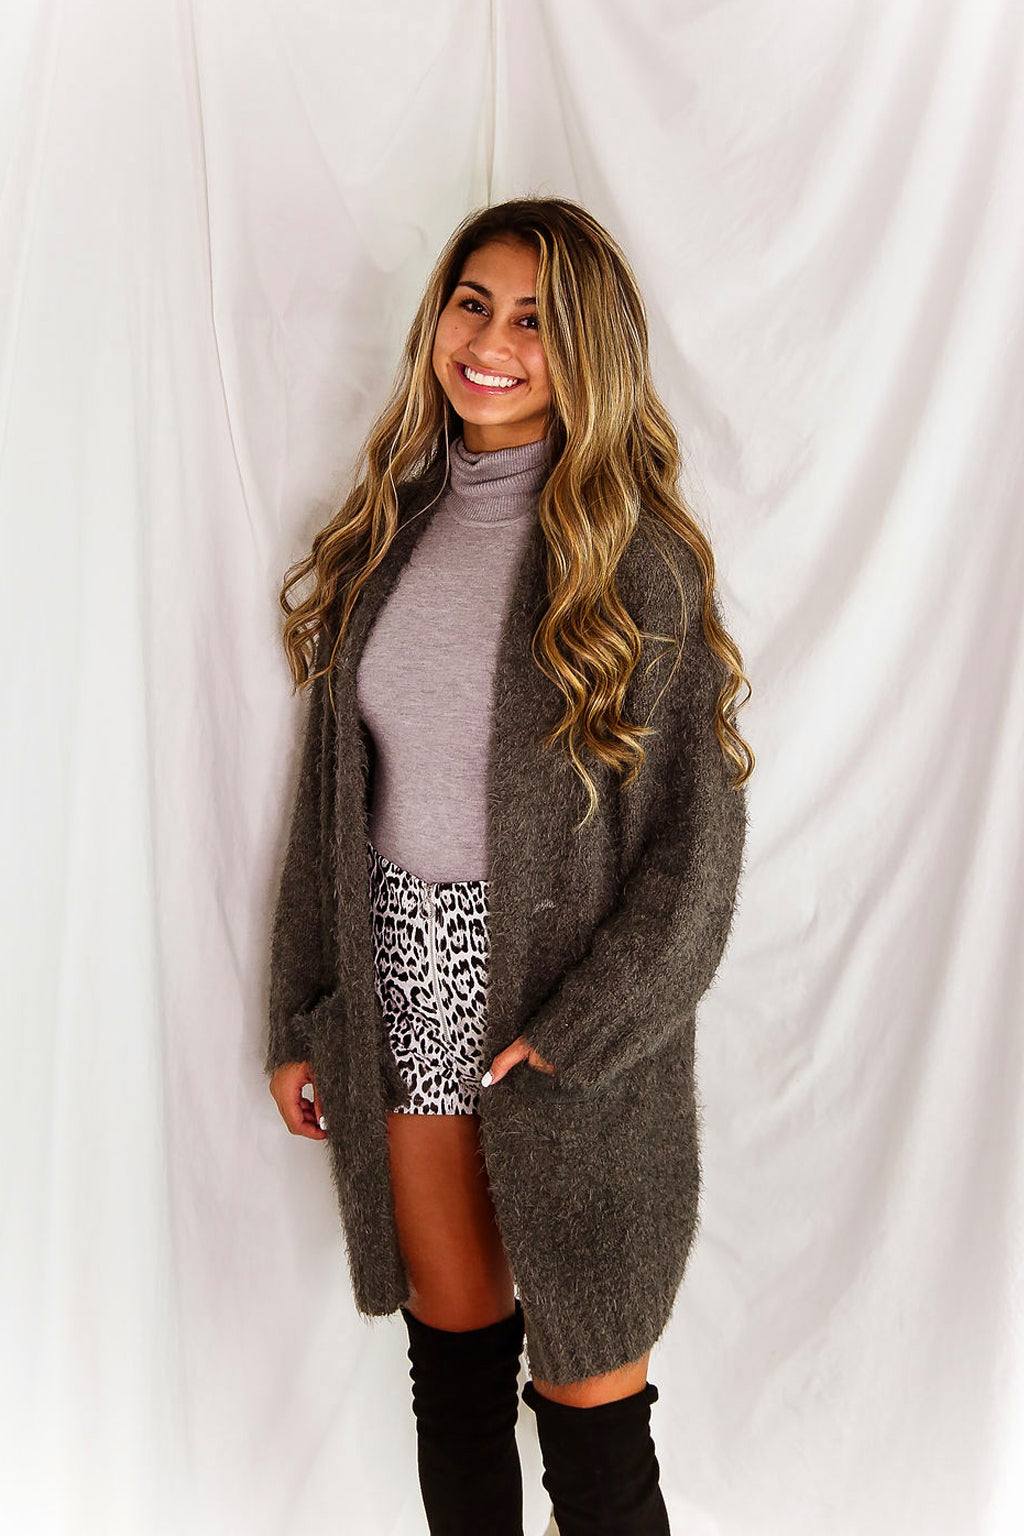 Fuzzy Charcoal Knit Cardigan - Shop Kendry Collection Boutique